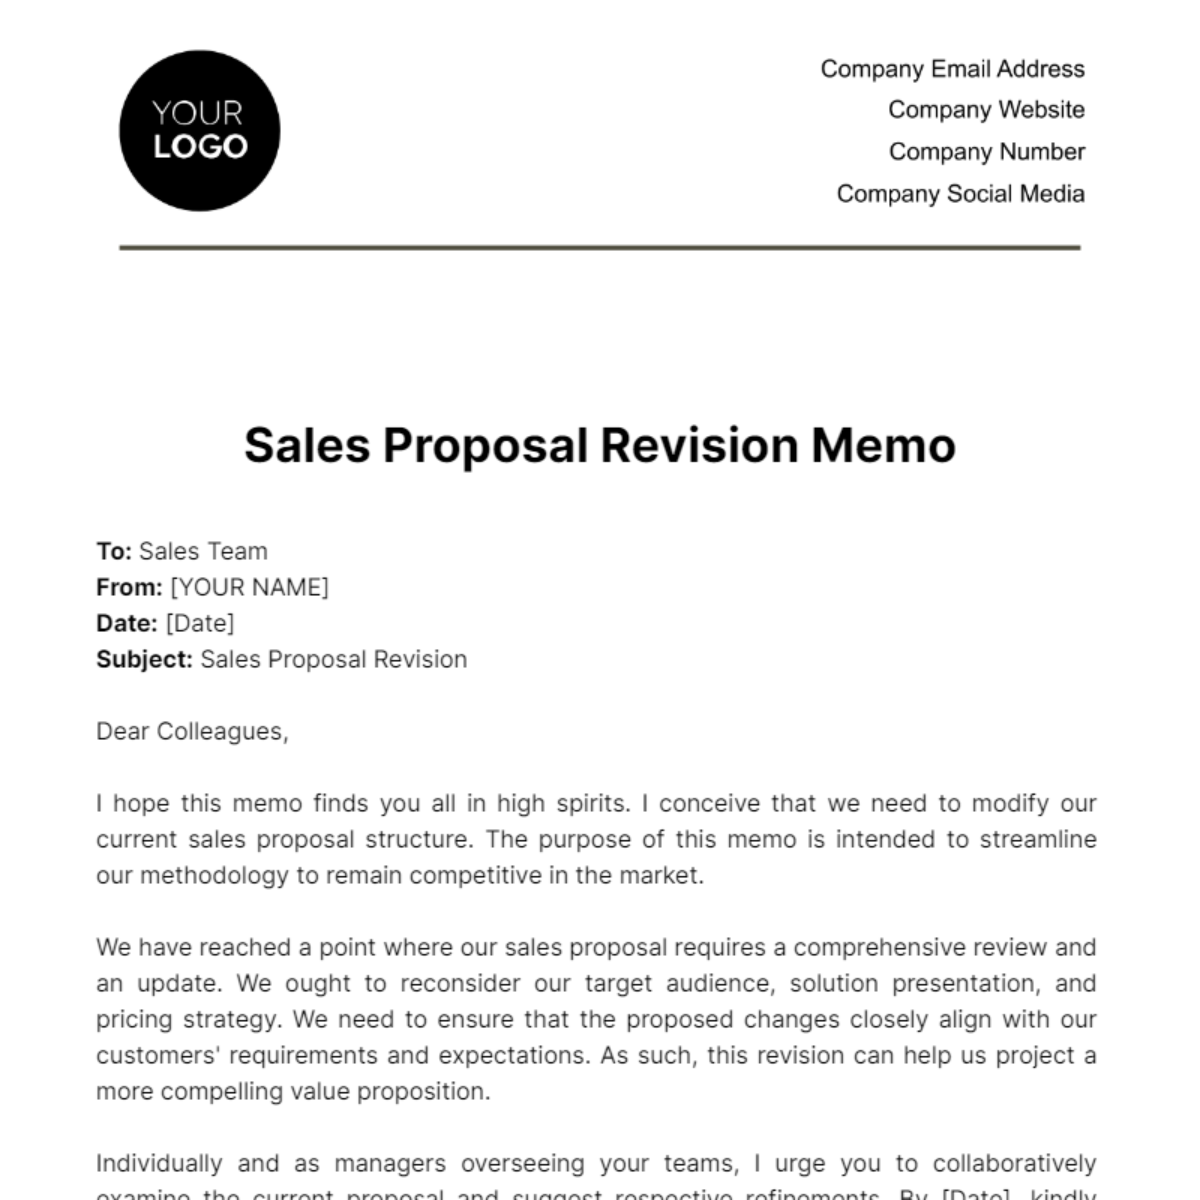 Free Sales Proposal Revision Memo Template